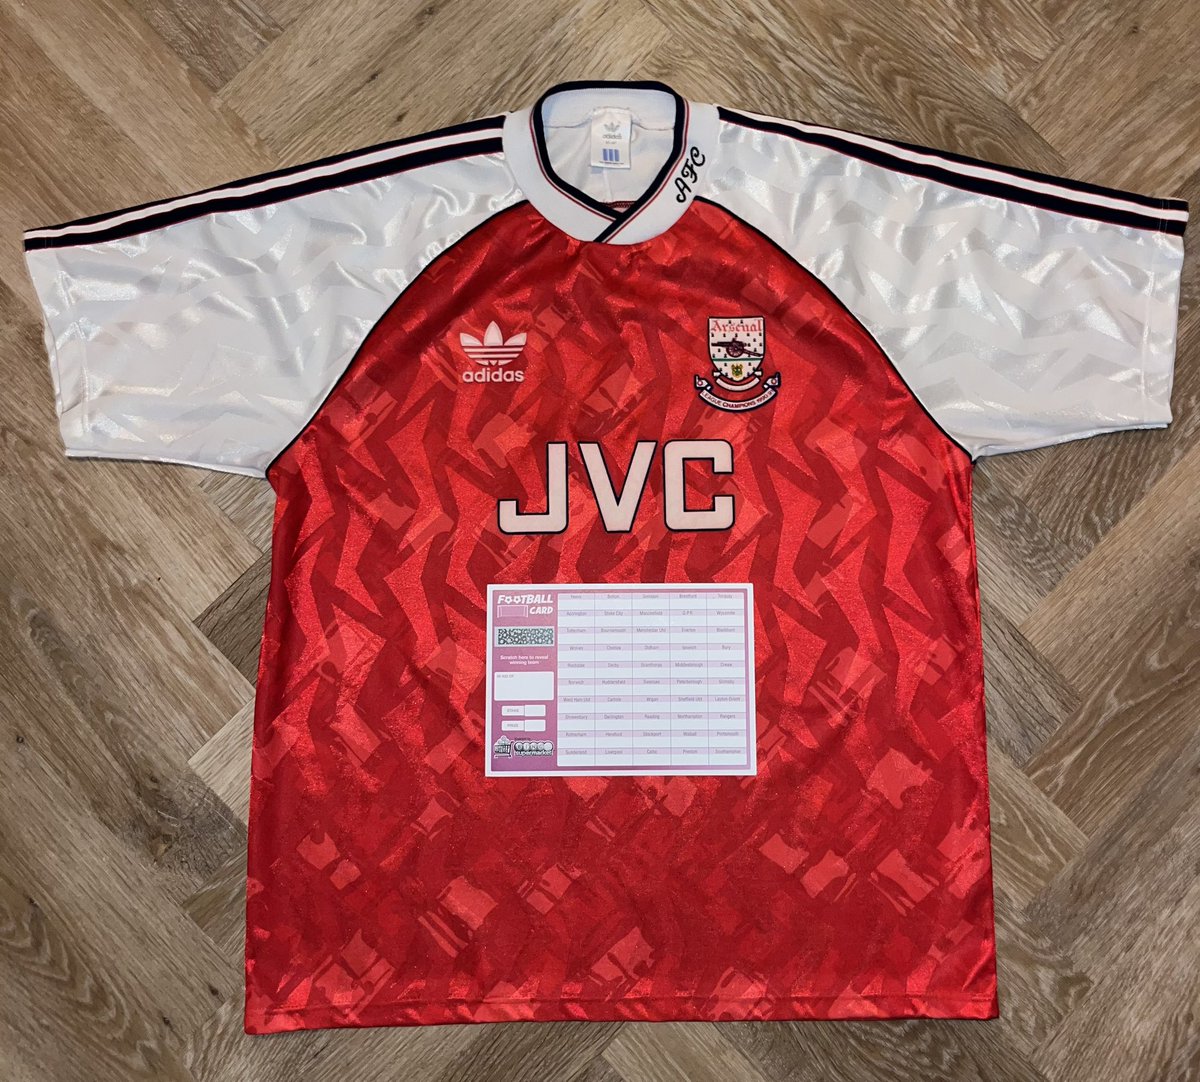 ⚪️🔴RAFFLE🔴⚪️ 🌟Now featuring the 1991-92 Home shirt with the champions banner celebrating the league title of 1990-91!🏆 In my view, it’s a timeless classic that rivals the best from the Adidas collection😍 - Size L👕 - £3.50 an entry 🎟️